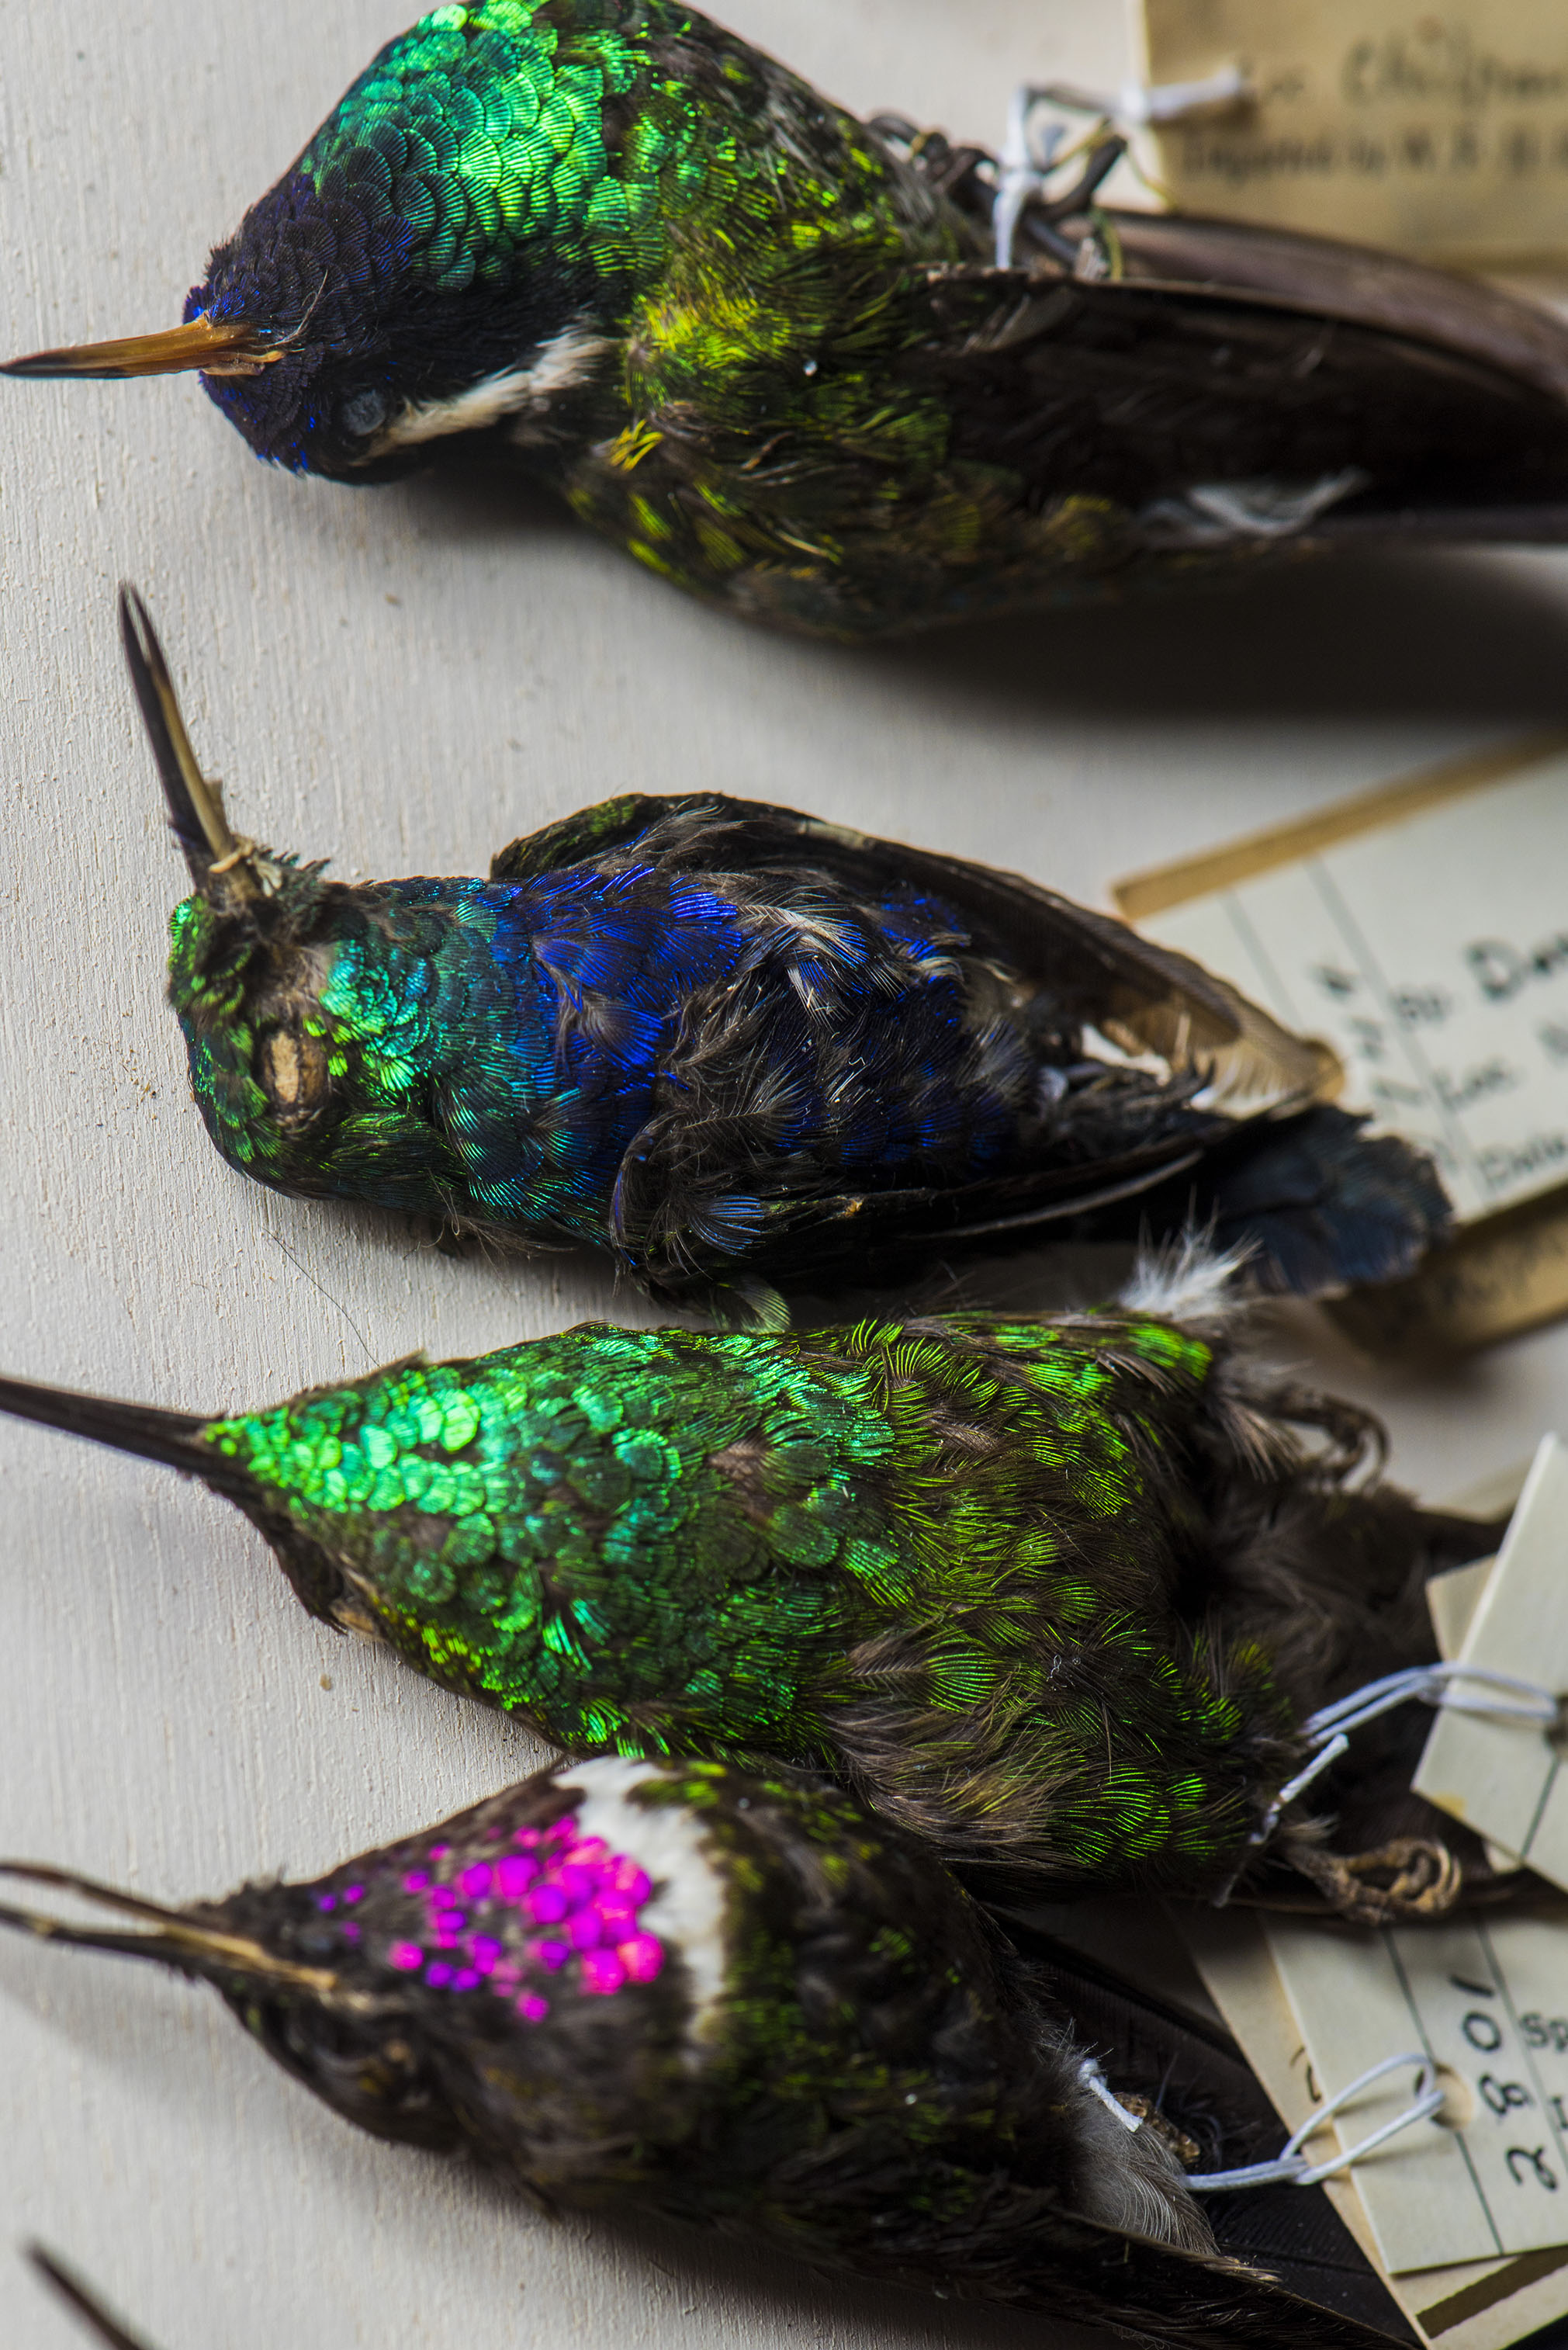 Four small, colourful, iridescent bird specimens with long beaks laid next to one another, with record cards attached to their legs.